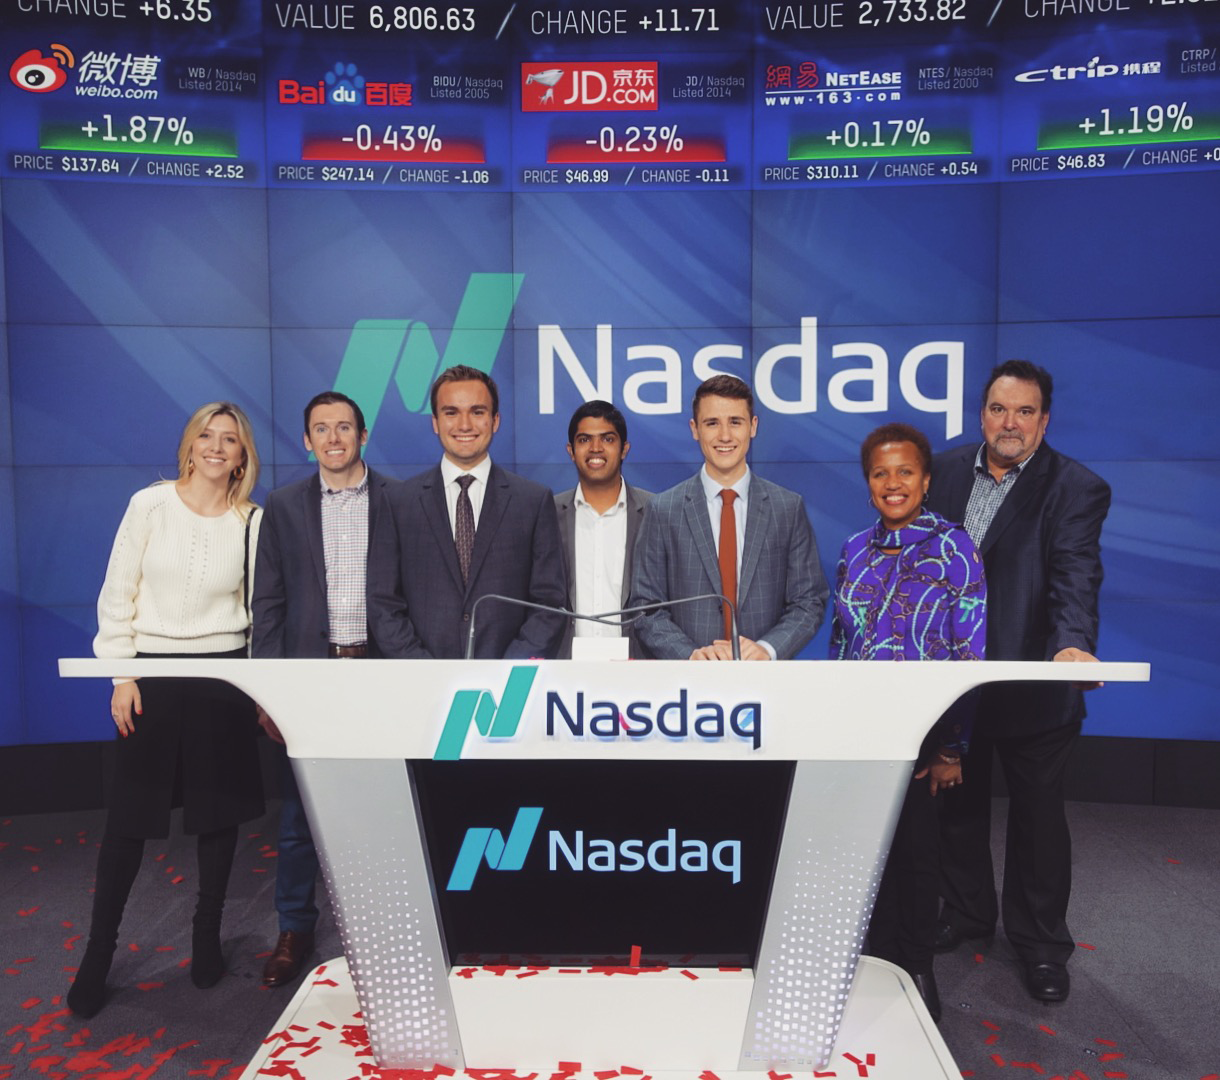 Members of the winning team from the 2017-2018 competition, the New Haven Bulldogs, at the Nasdaq with members of Voleo.